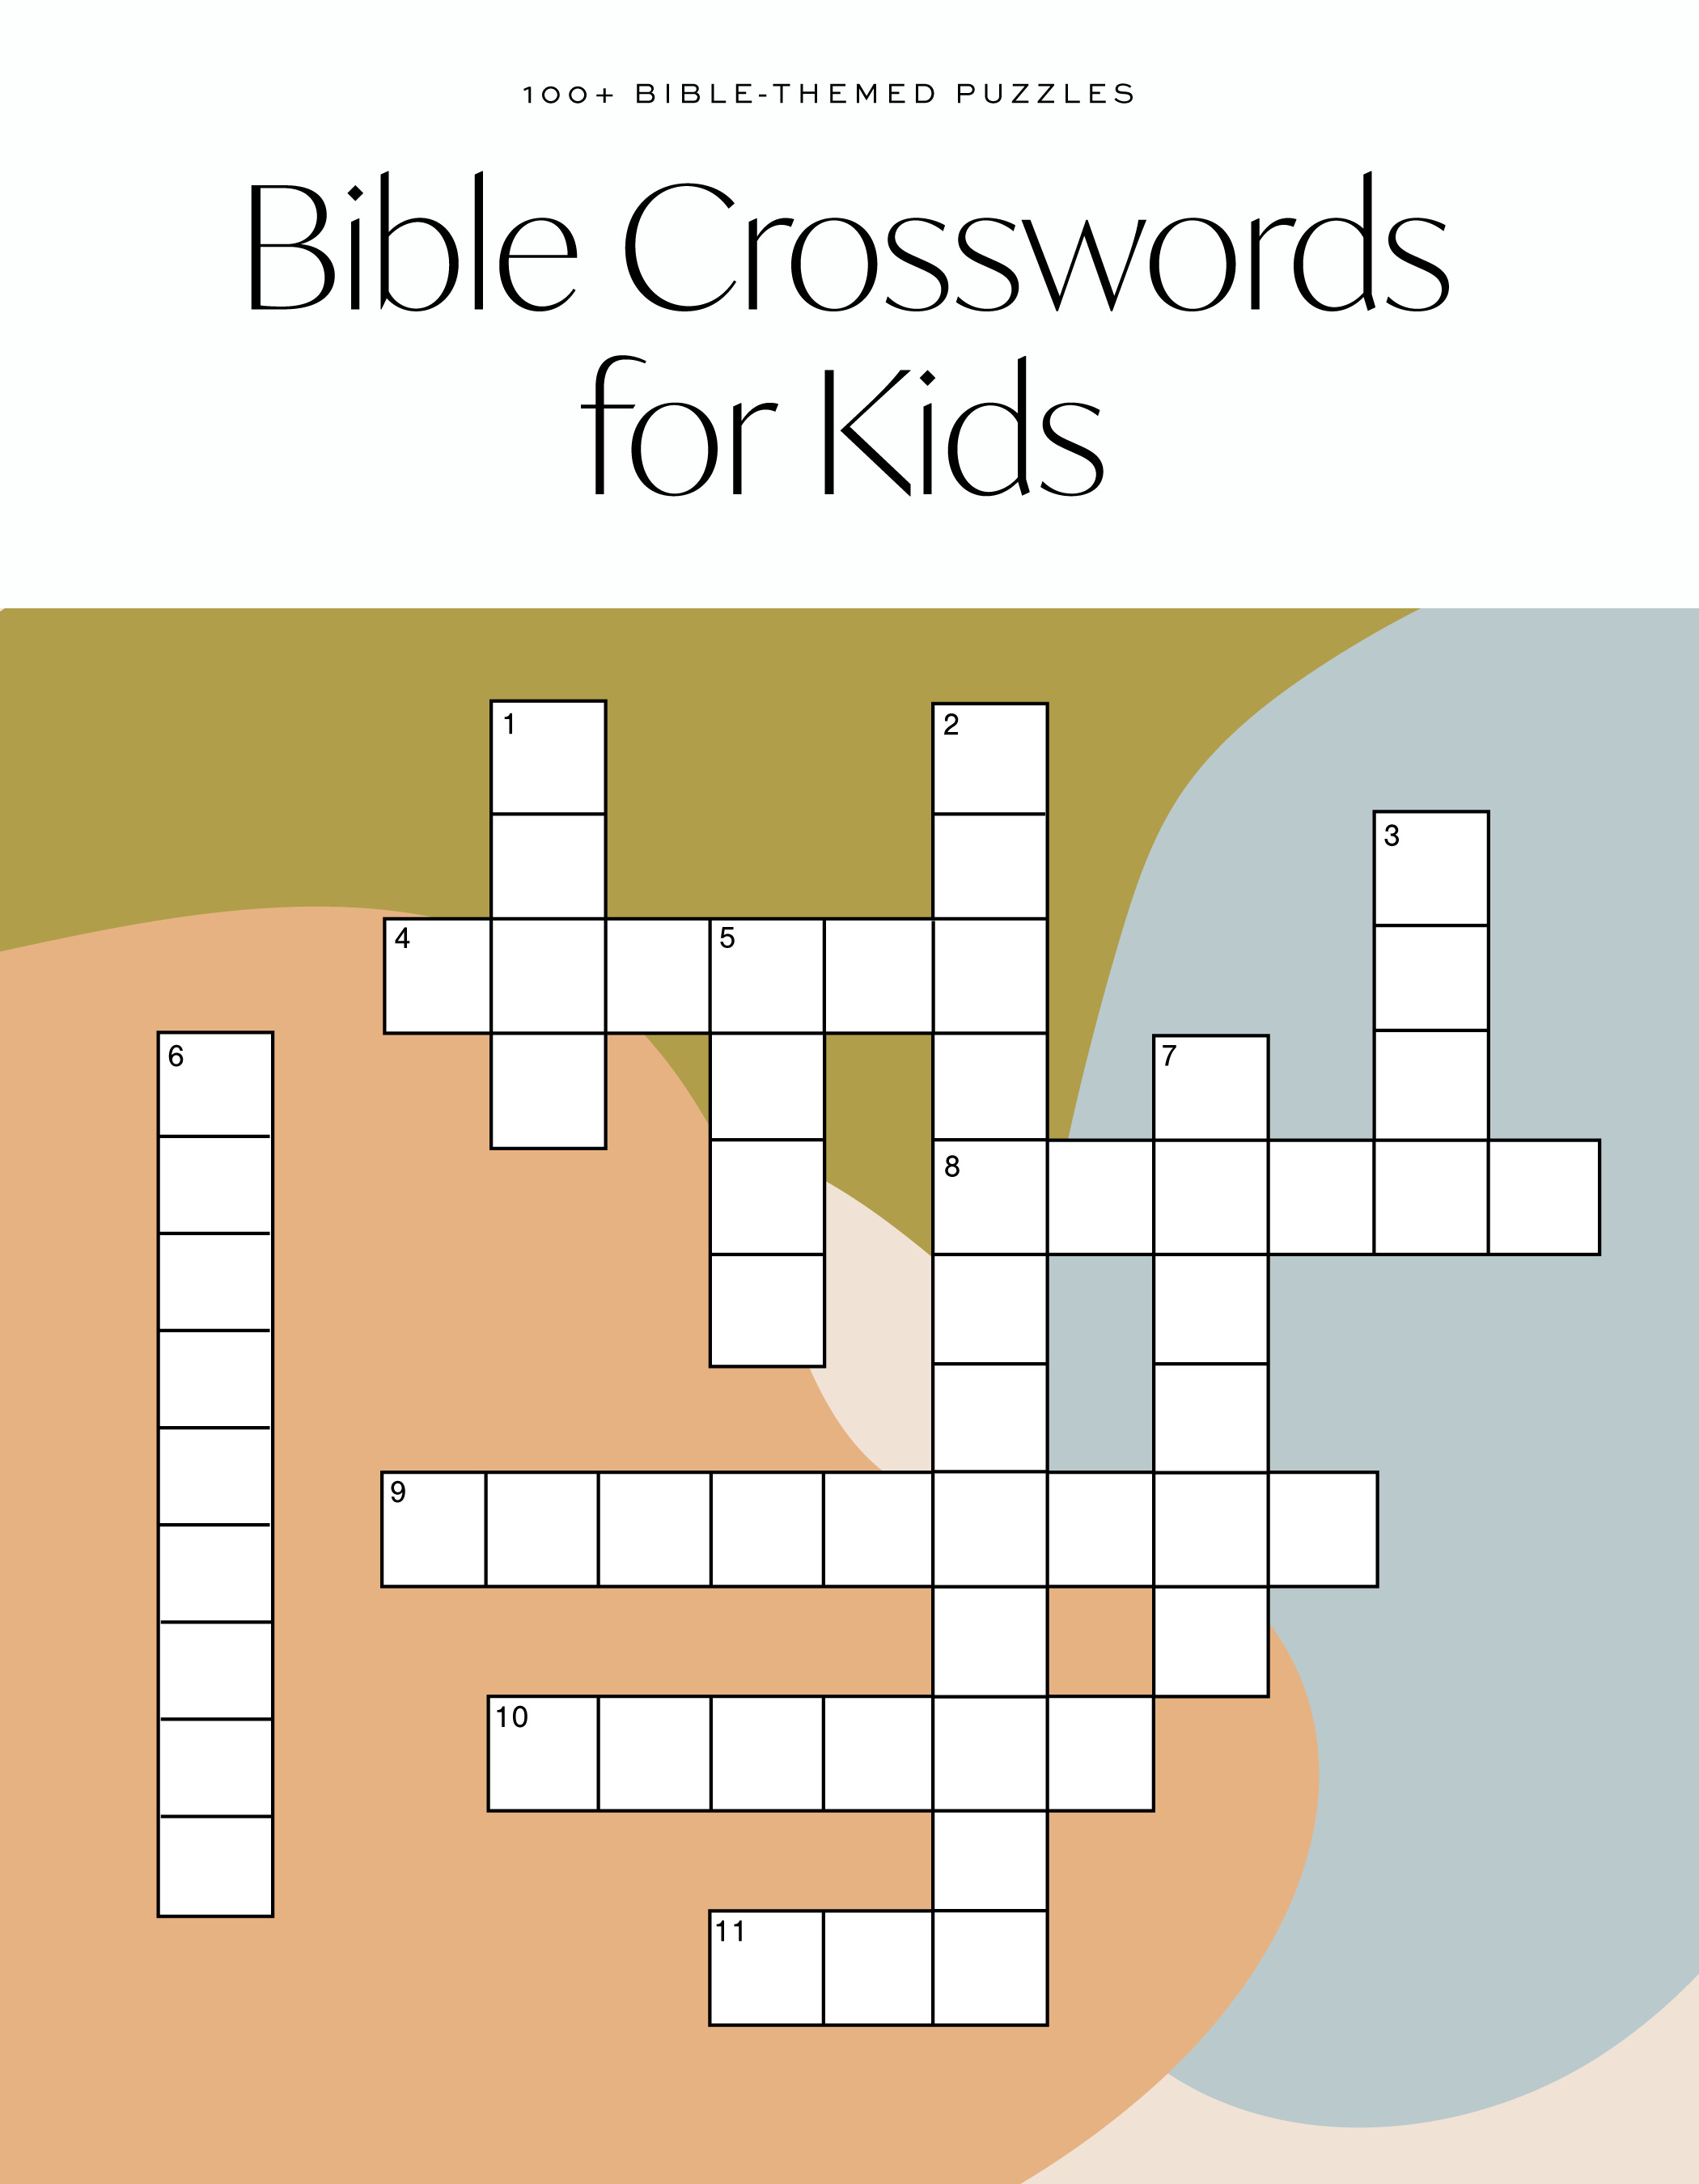 Bible Crossword for Kids : A Modern Bible-Themed Crossword Activity Book to Grow Your Child's Faith | 